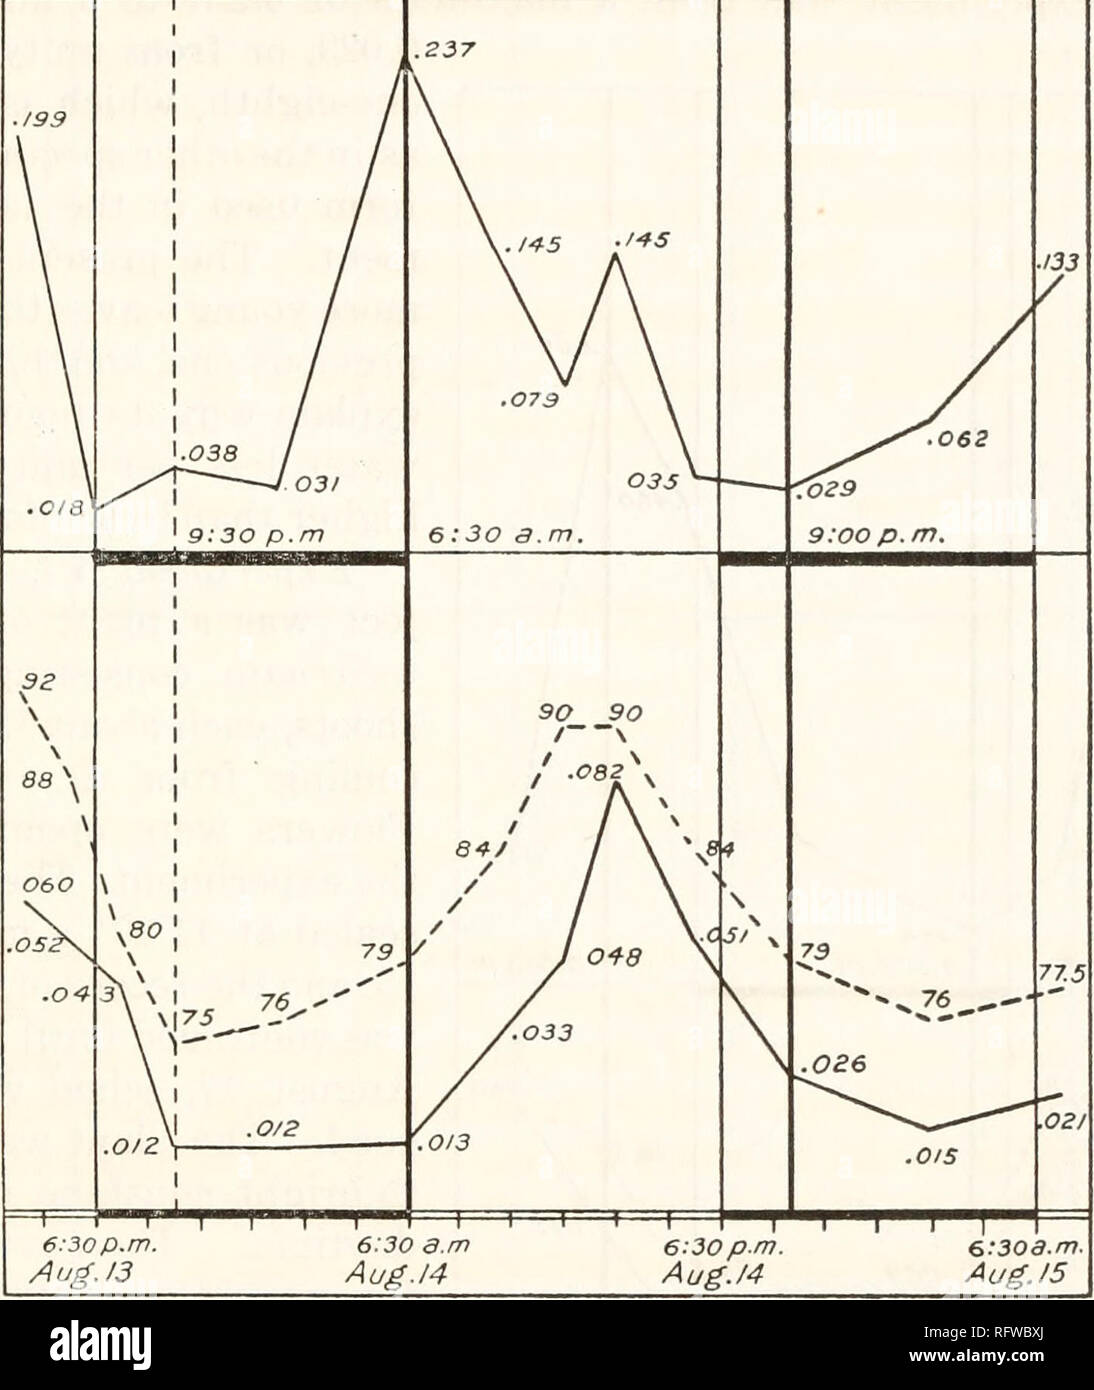 . Carnegie Institution of Washington publication. SOIL MOISTURE AND TO EVAPORATION. 55 manner as that used in the previous experiment, in figure 10. As in Experiments I and IV, a periodic fluctuation in the rate of relative trans- piration is shown, the low period being in the night and the high period in the day. During the record of the experiment only a single unquestionable maximum is shown. This has a rate of relative trans- piration of 0.237 at 6''30m a.m., and occurs with a temperature of 79° F.. FIG. 10.—Curve of relative transpiration for a second plant of Tribulus, August 13-15, 1904 Stock Photo